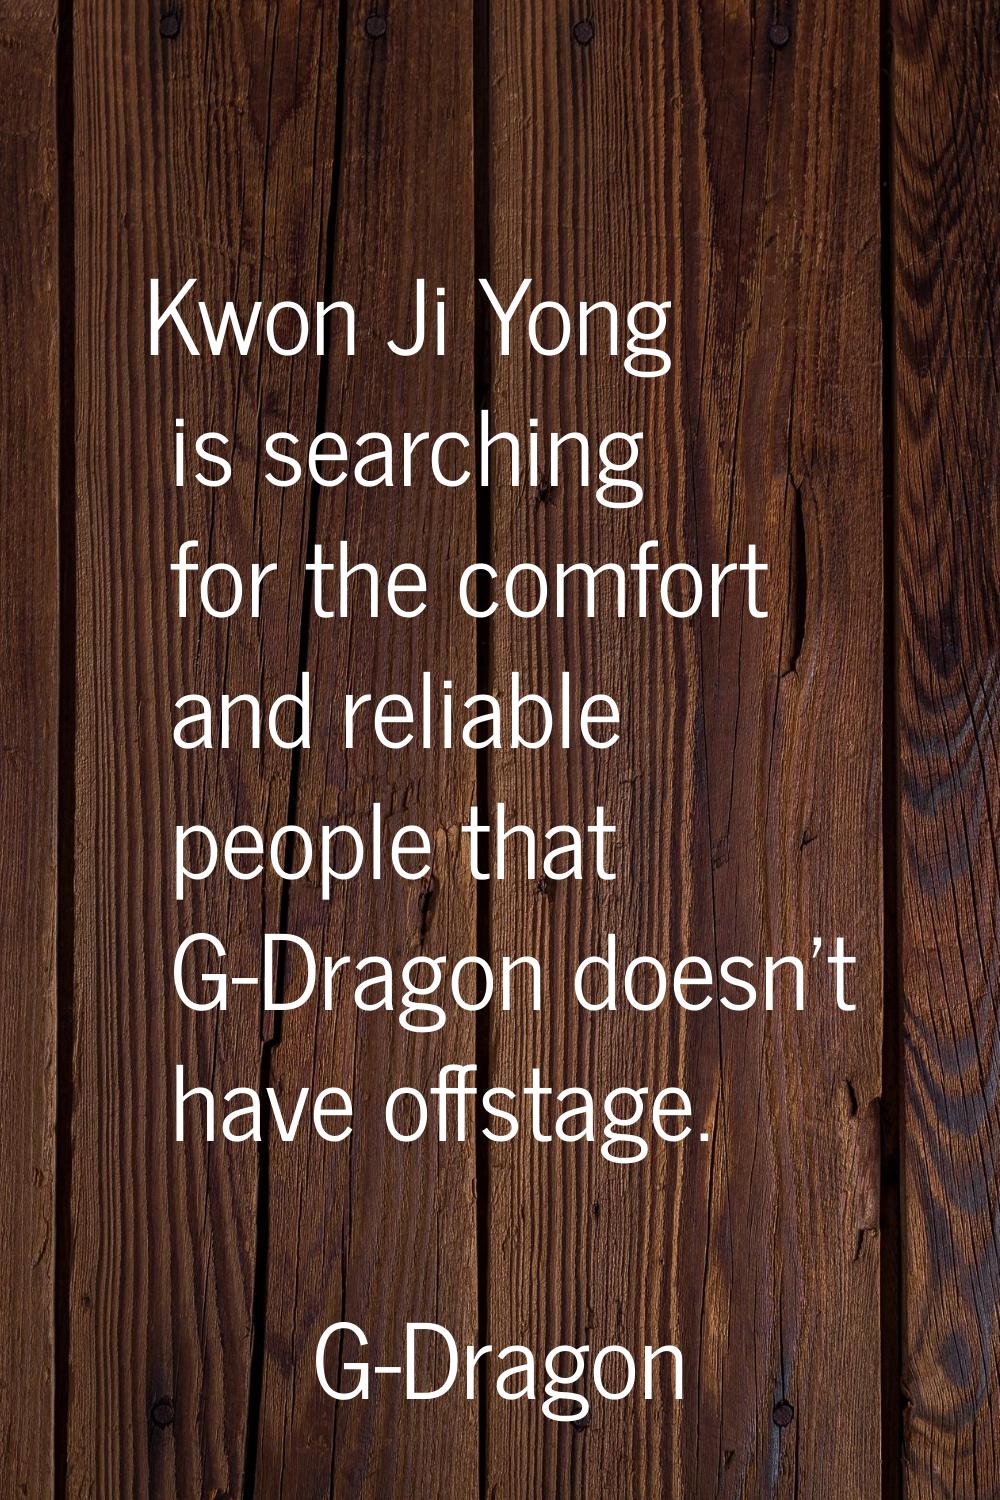 Kwon Ji Yong is searching for the comfort and reliable people that G-Dragon doesn't have offstage.